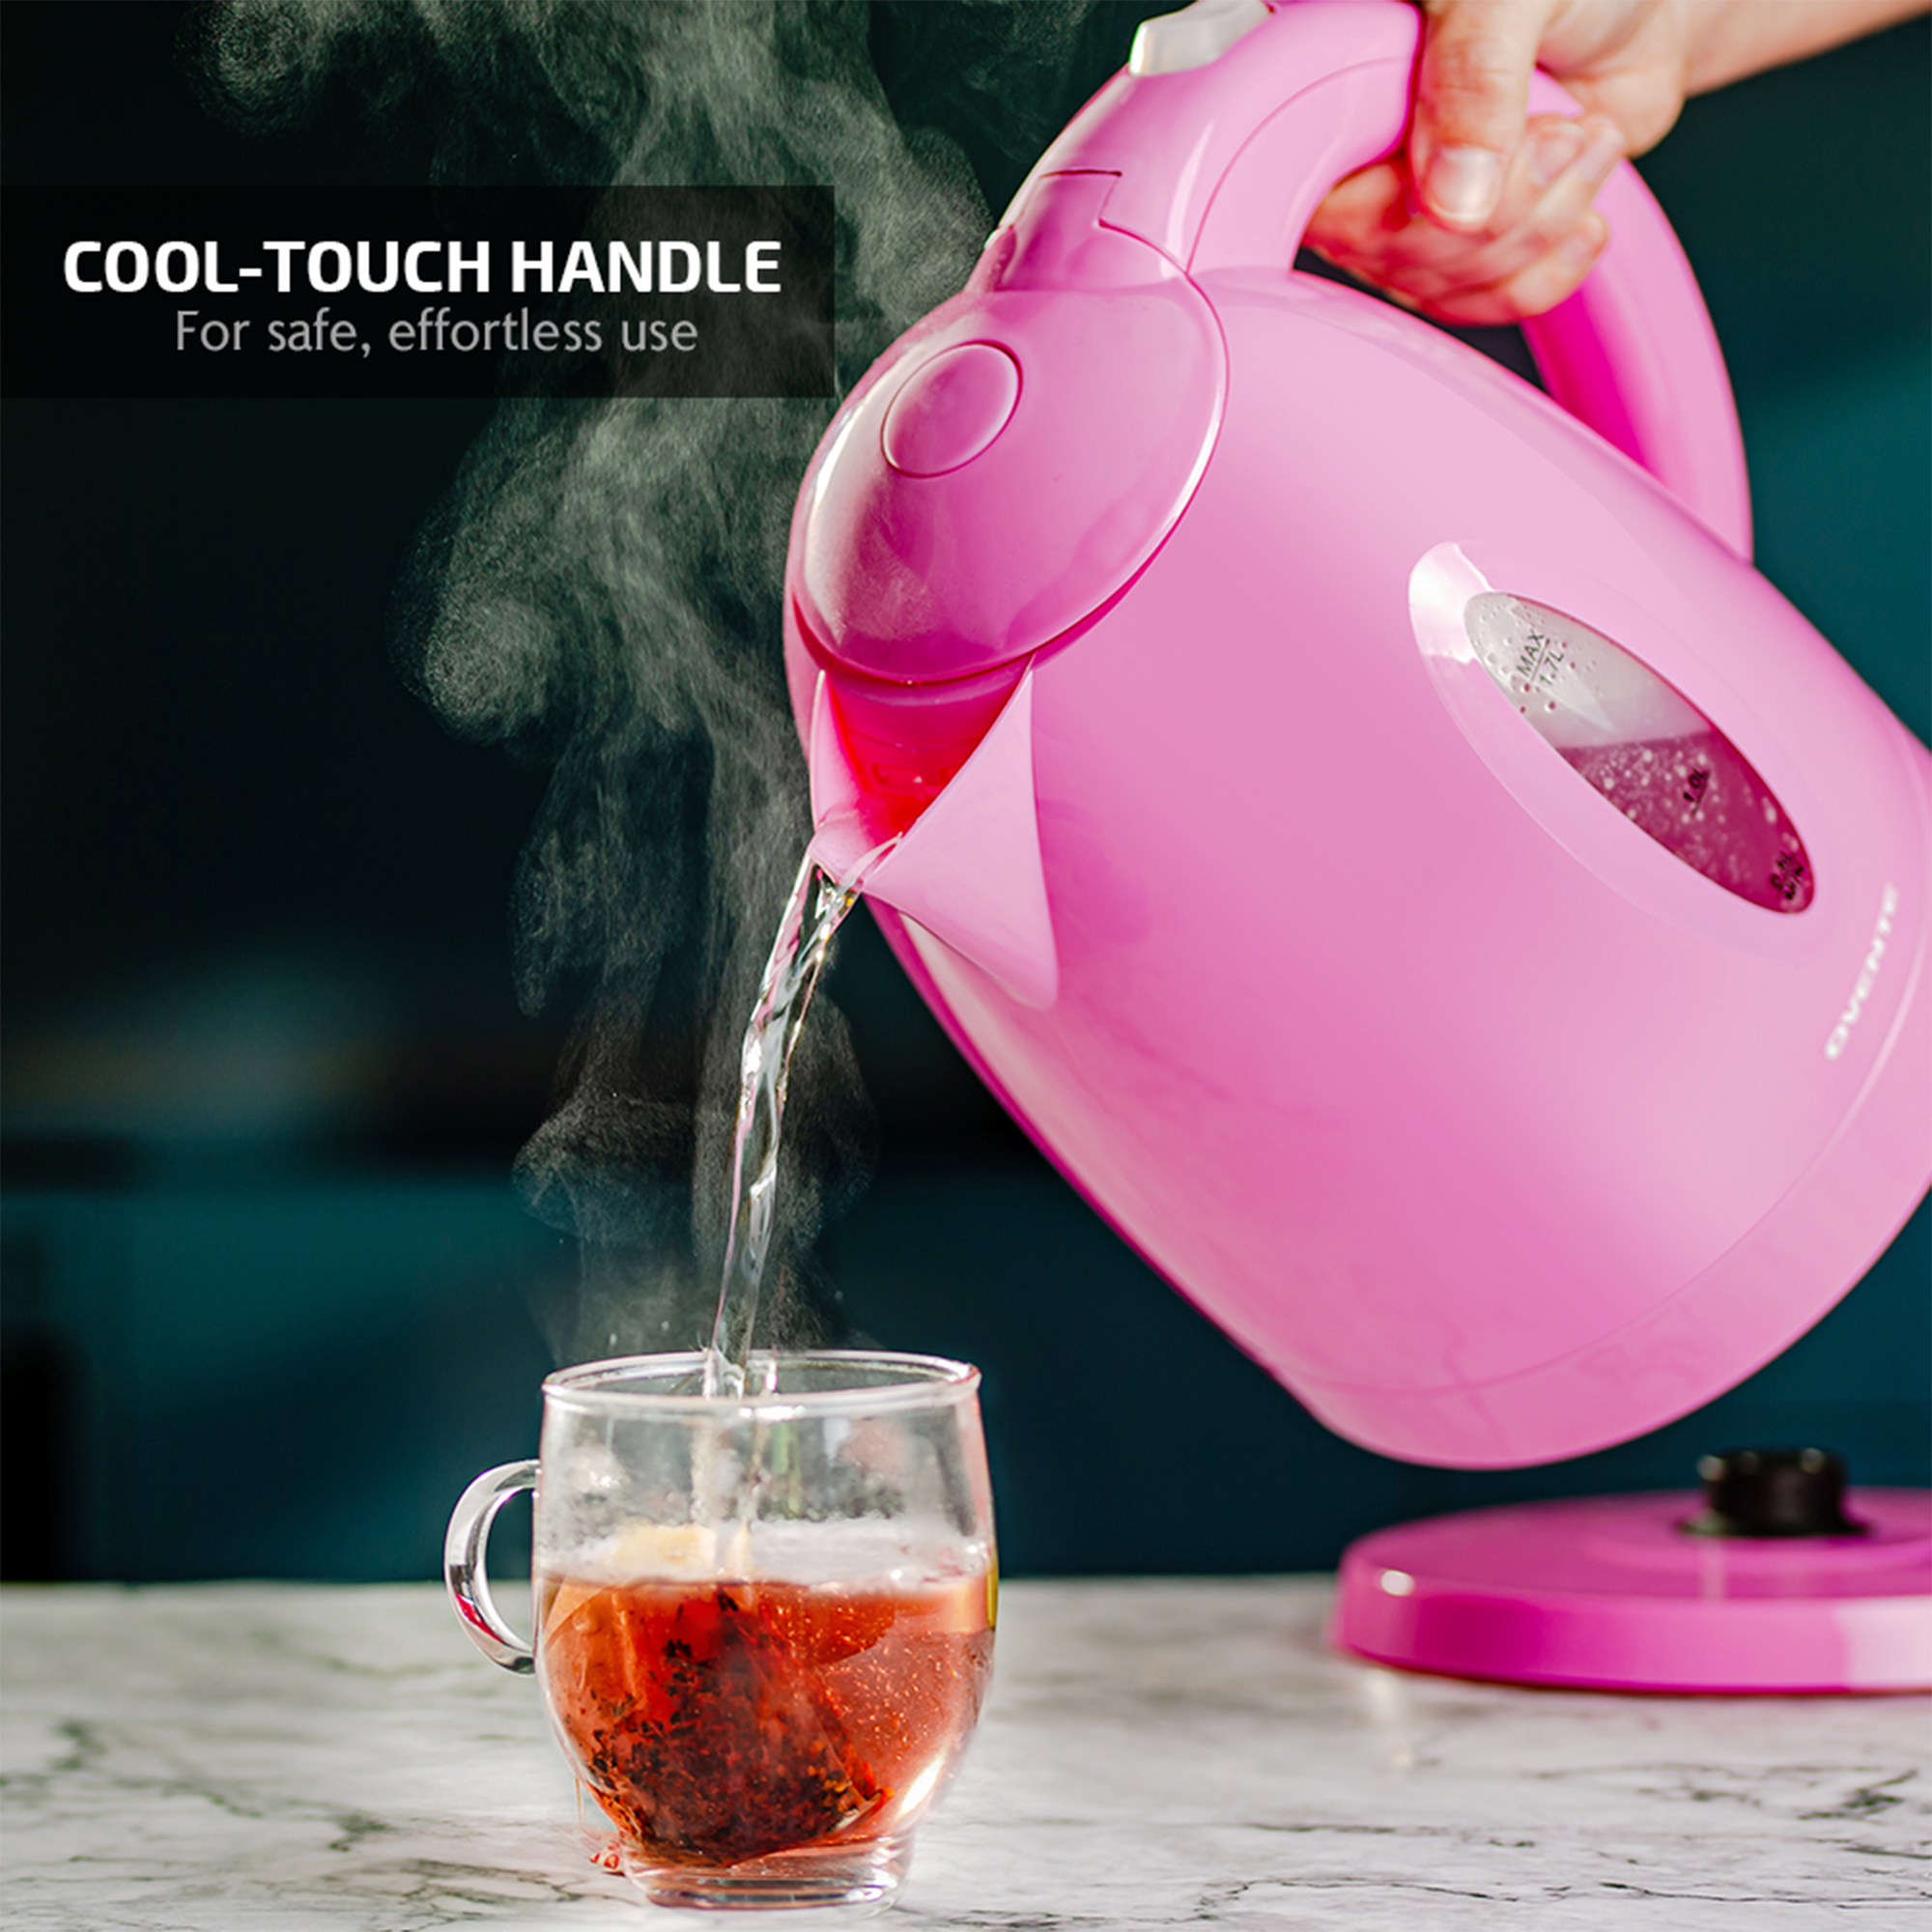 Ovente Electric Hot Water Kettle 1.7 Liter with LED Light, 1100 Watt BPA-Free Portable Tea Maker Fast Heating, Pink KP72P